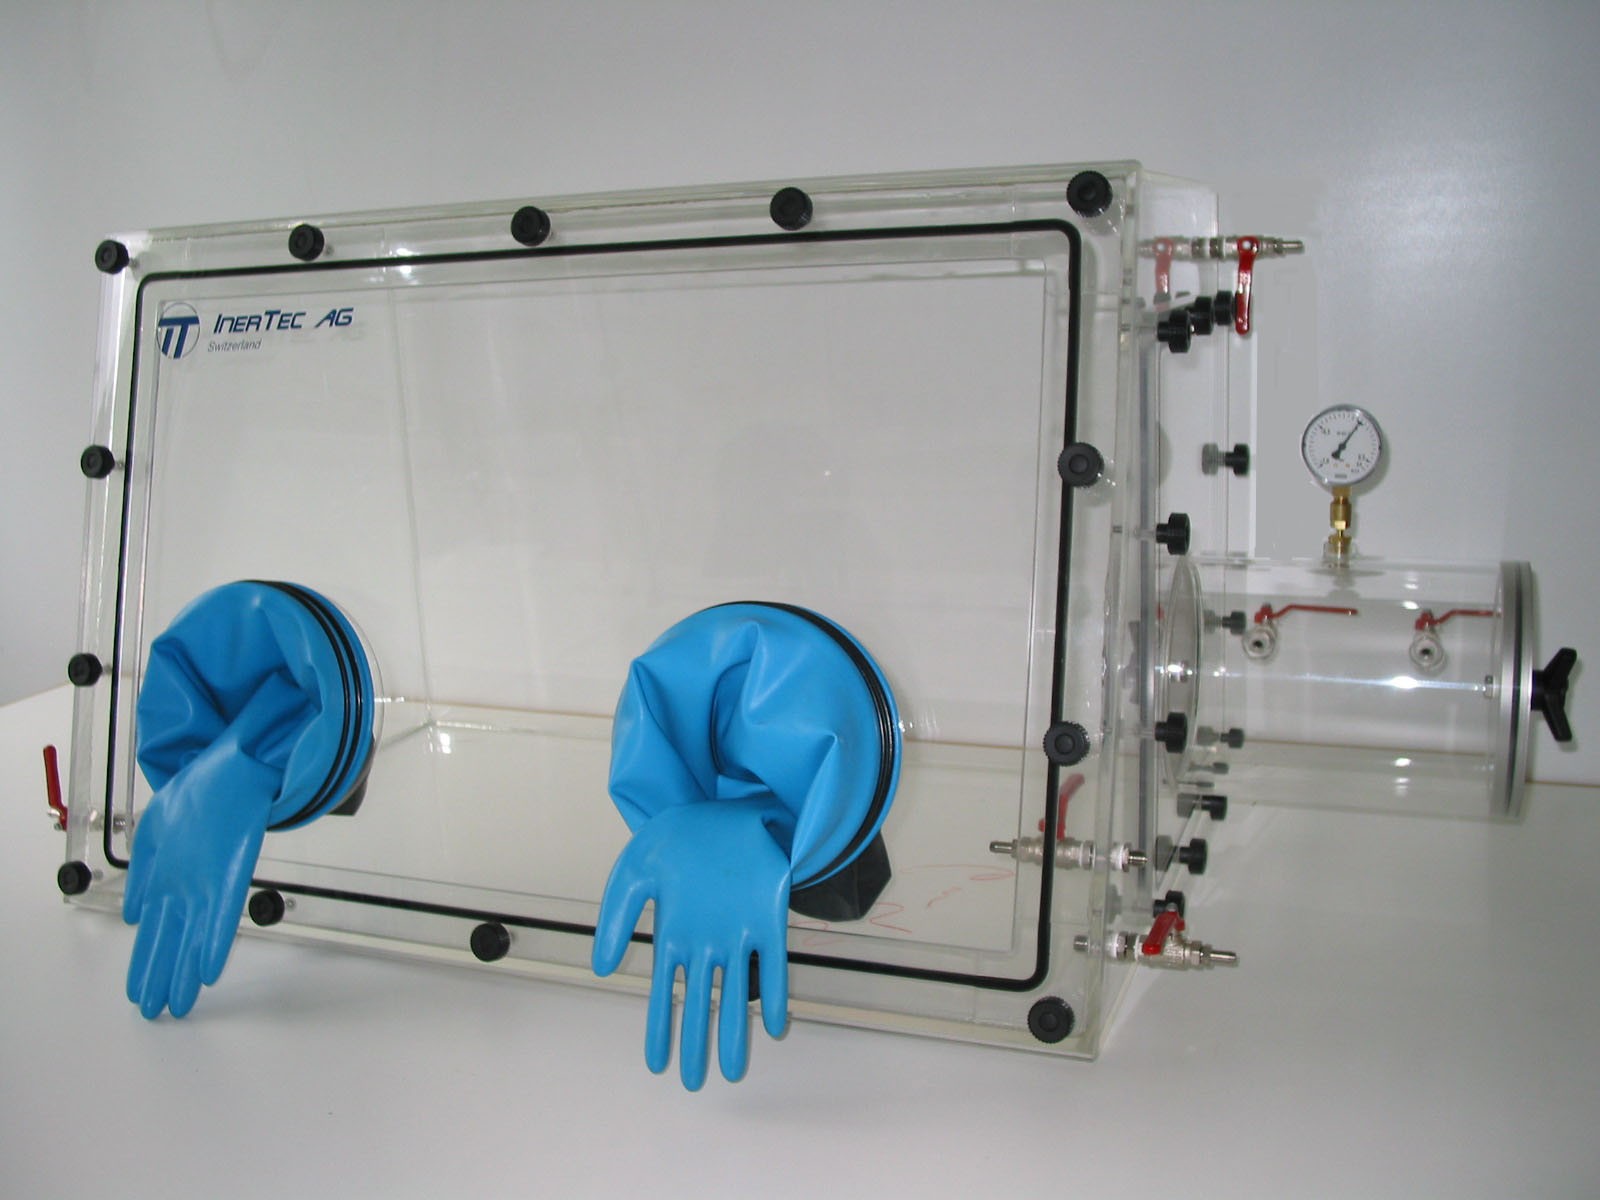 Glovebox made of acrylic&gt; Gas filling: automatic flushing with pressure control, front version: swivels upwards, side version: round vacuum lock, control: humidity controller and oxygen display with data logger